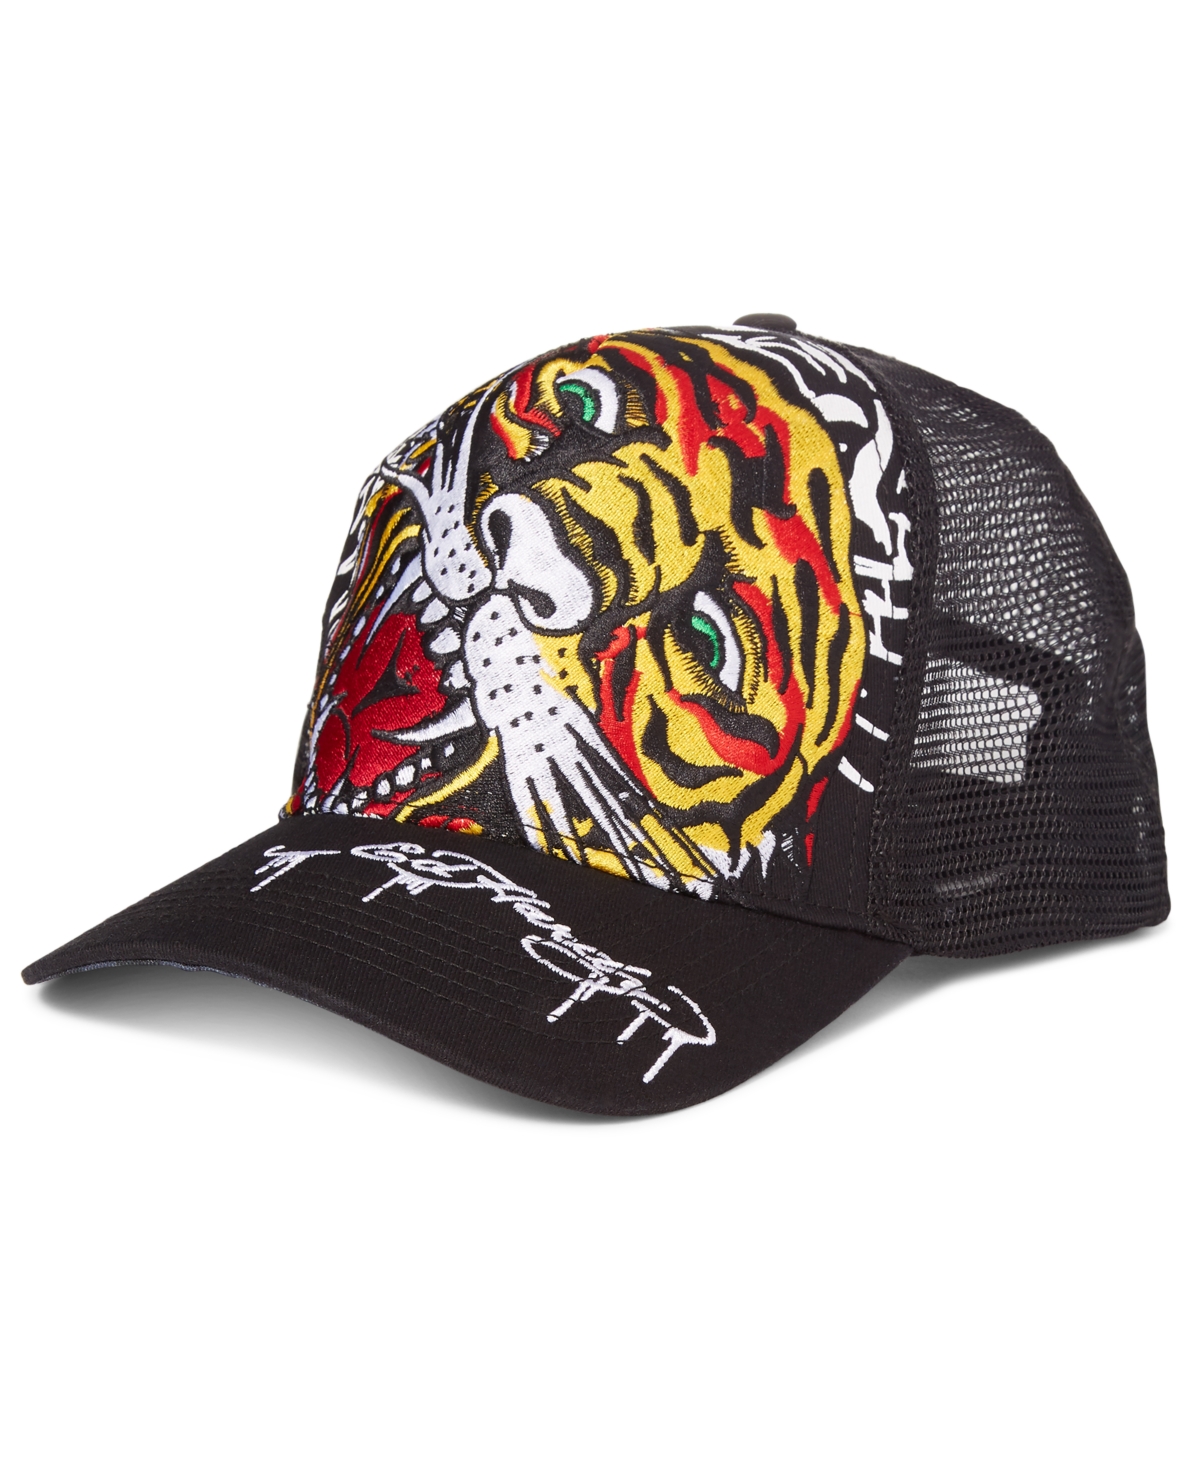 Ed Hardy Men's Throwback Embroidered Tiger Head Trucker Hat